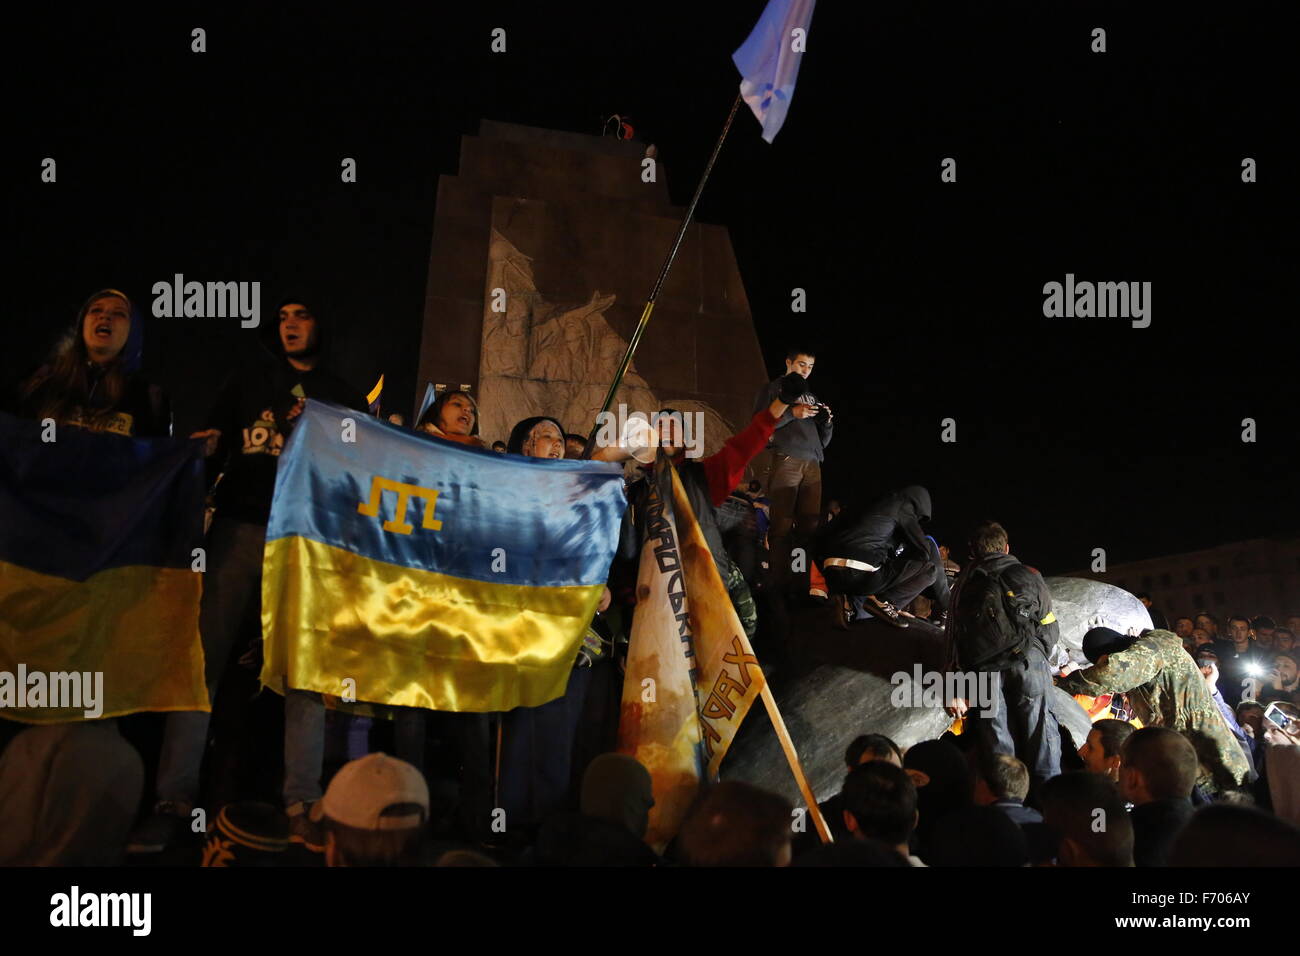 Ukrainianian protesters, some holding a Tartar flag to represent Crimea, celebrate after cutting down the Lenin Statue on Freedom Square in Kharkiv, Ukraine, in a predominately Russian speaking area of the country. The statue, one of the largest in Ukraine, is on the largest square in the country. Stock Photo